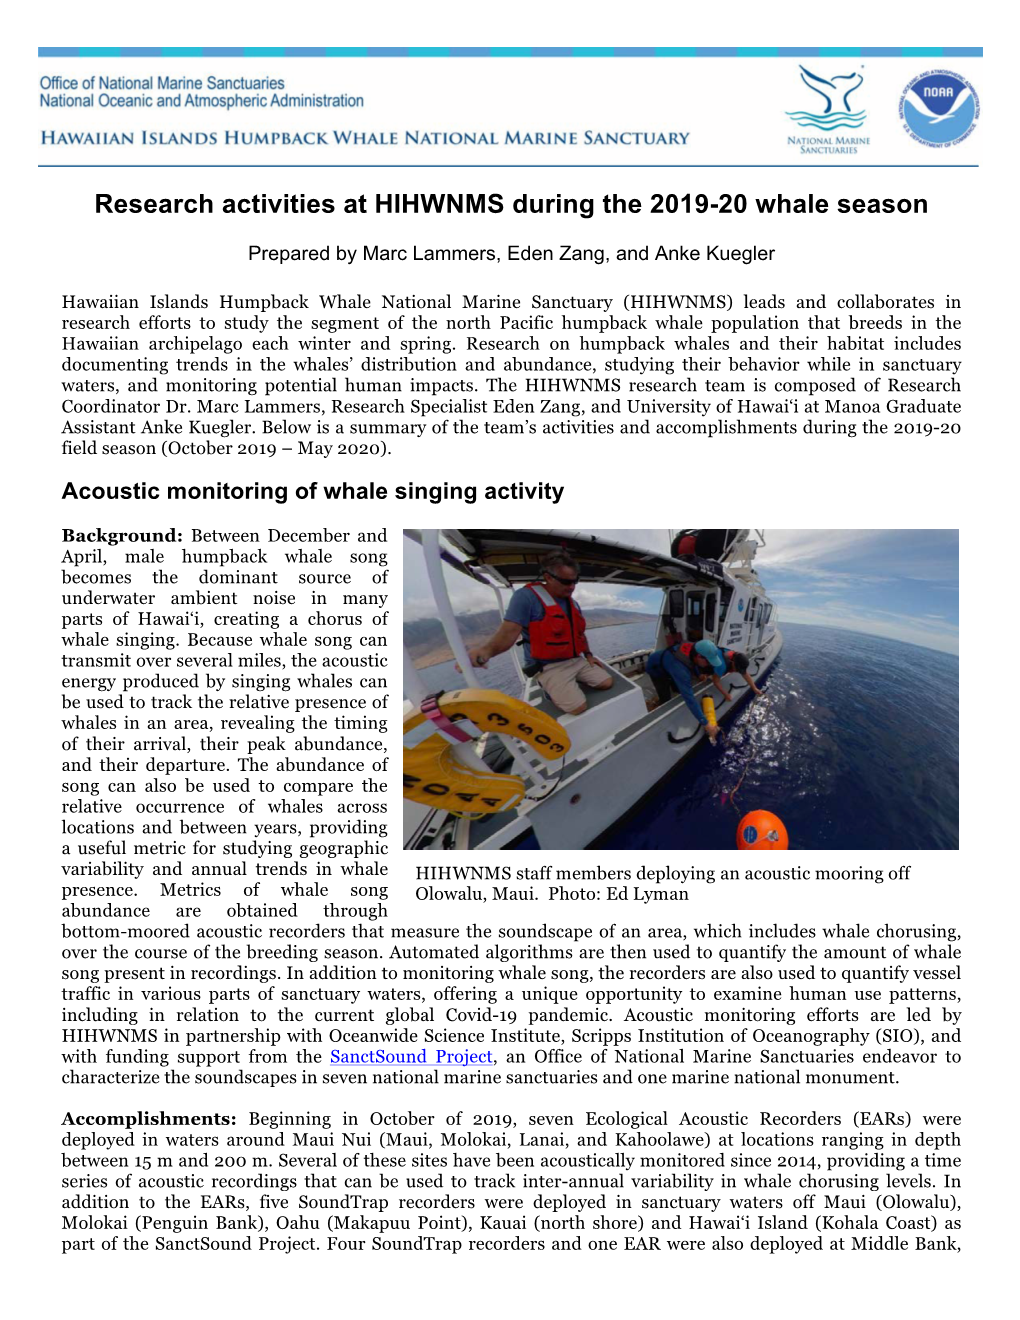 Research Activities at HIHWNMS During the 2019-20 Whale Season